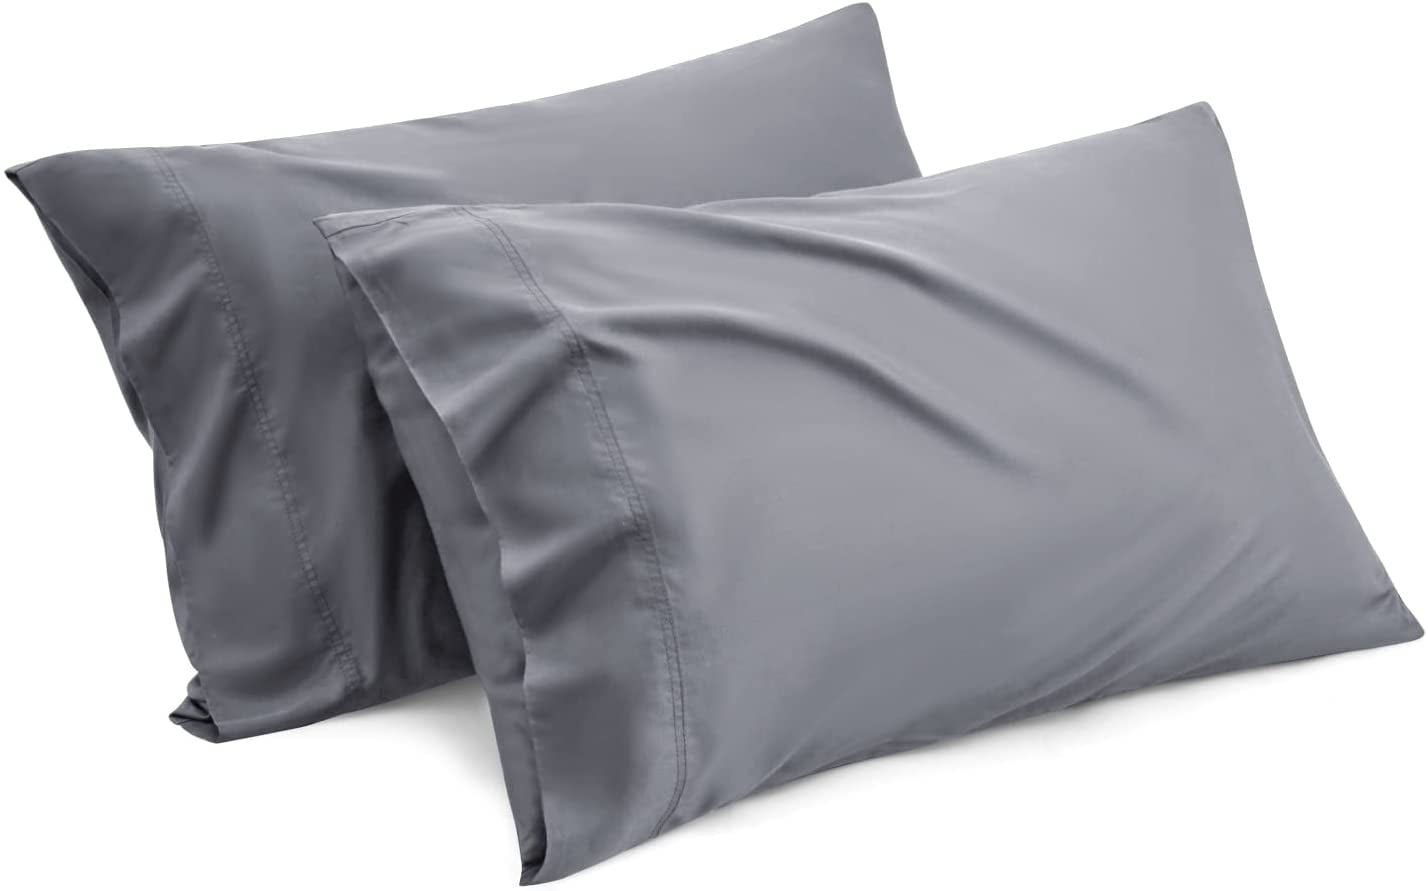 20 x 26 Grey Cooling Cotton Pillow Cases for Hot Sleepers with Envelope Closure Bedsure Standard Pillowcases Size Set of 2 Breathable Soft Double Side Pillow Cases with Cooling & Cotton Fiber